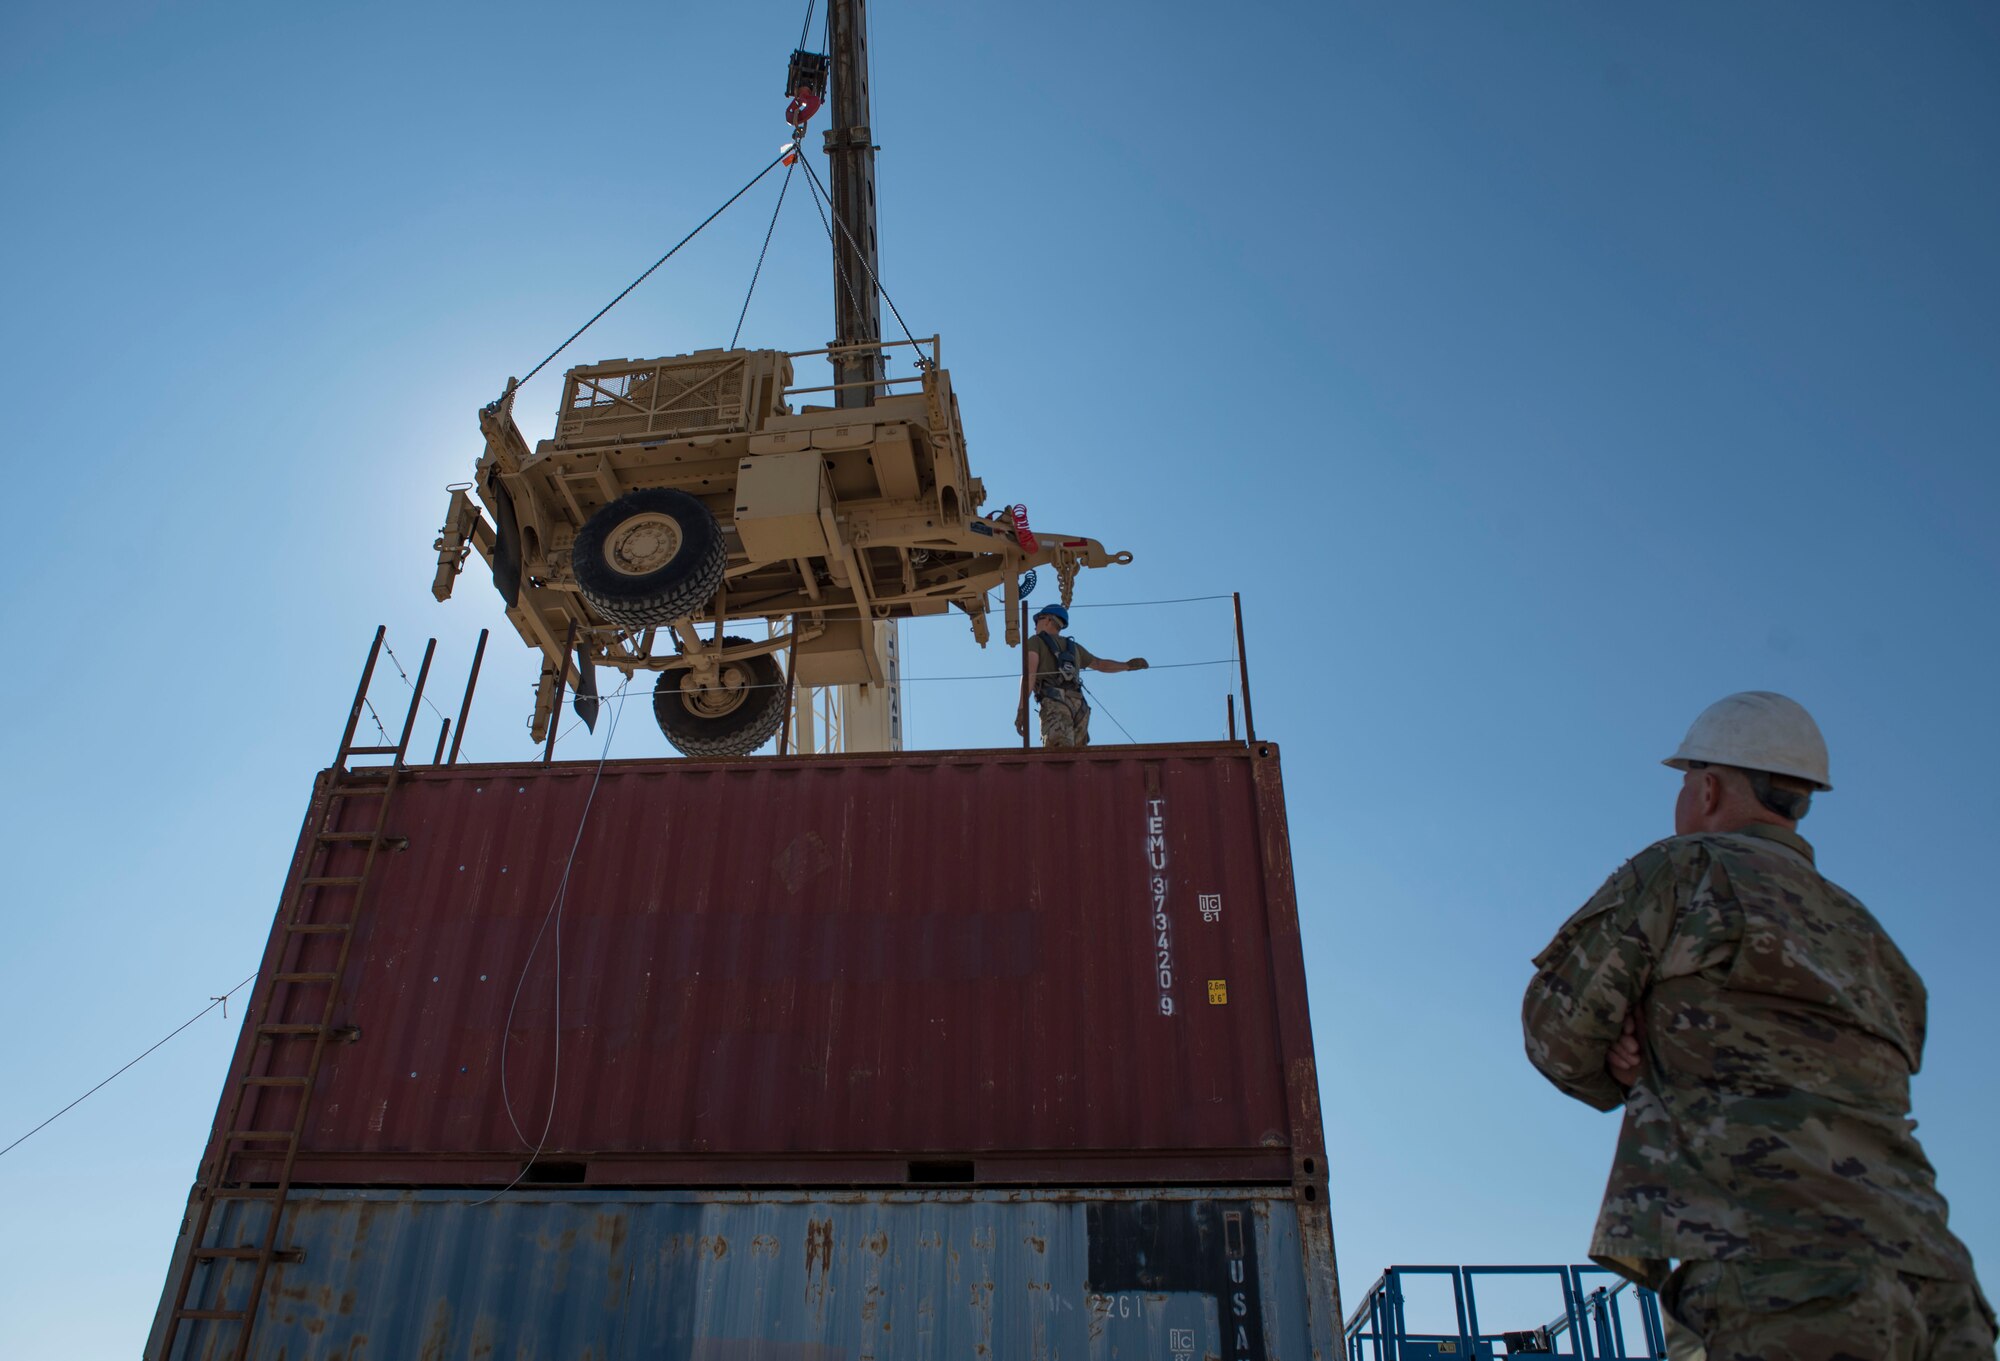 U.S. Air Force Airmen assigned to the 386th Expeditionary Civil Engineer Squadron lower an AN/MQP-64 Sentinel radar onto an elevated structure at Ali Al Salem Air Base, Kuwait, Nov. 23, 2020.